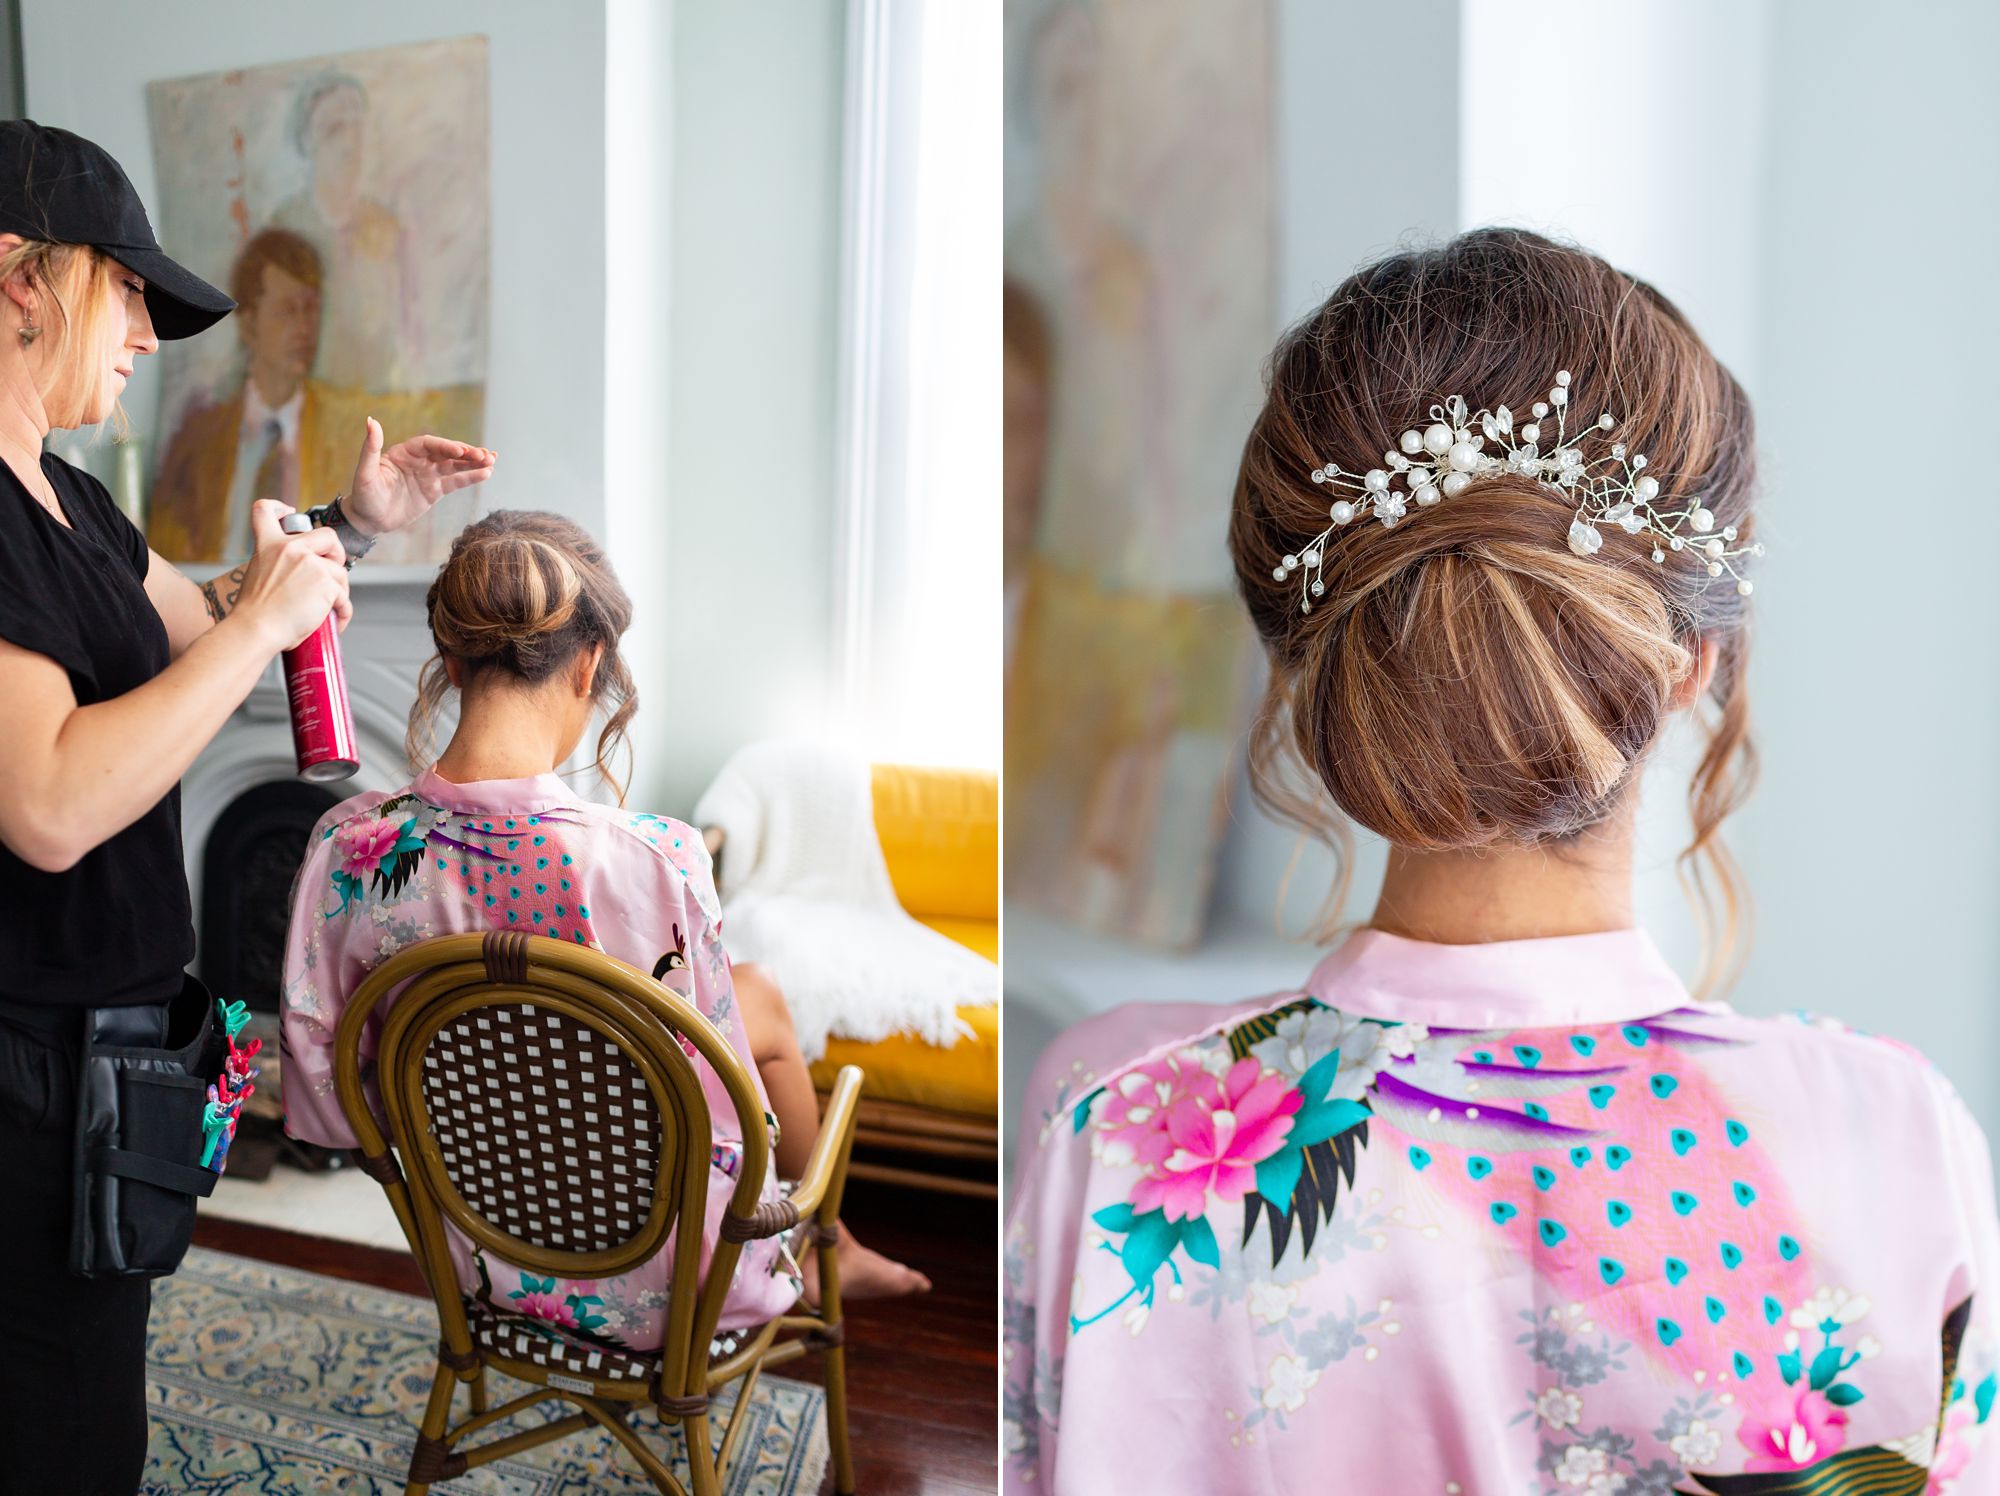 A hairstylist sprays a bride's hair with hairspray; the back of the bride's head with an updo embellished with a pearl and crystal comb.